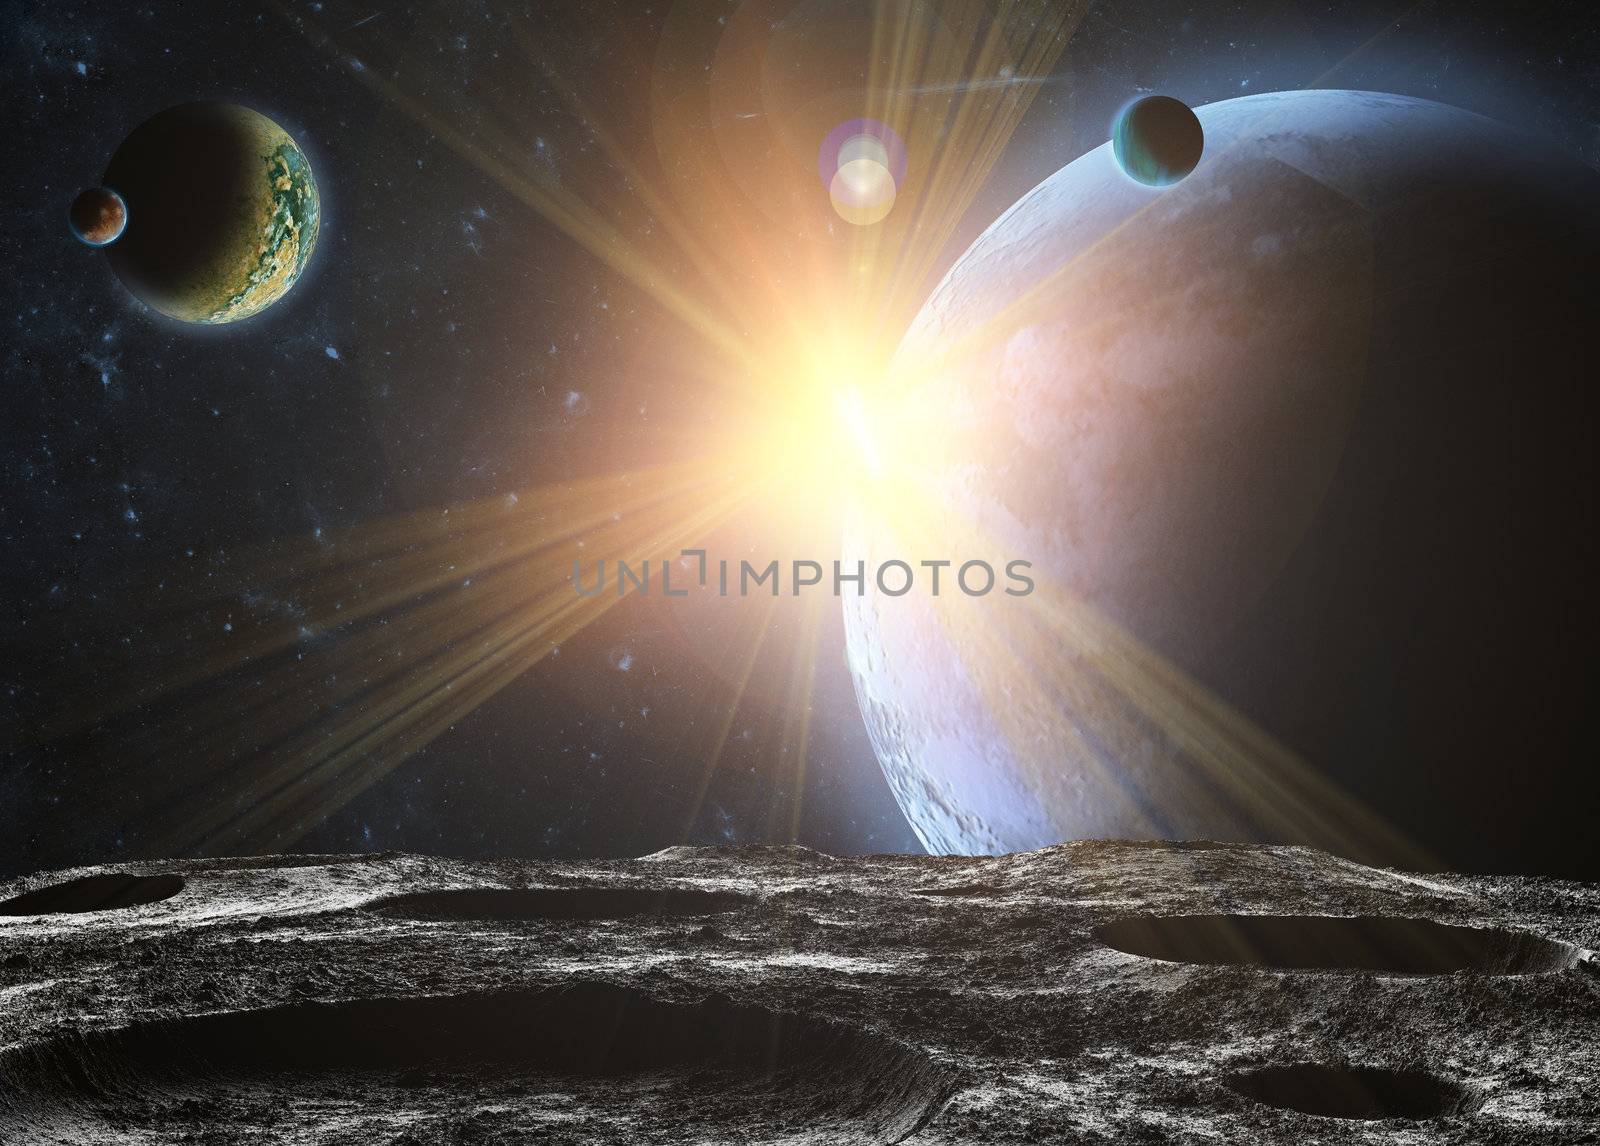 View of the Universe from the moon's surface. Abstract illustration of distant regions.